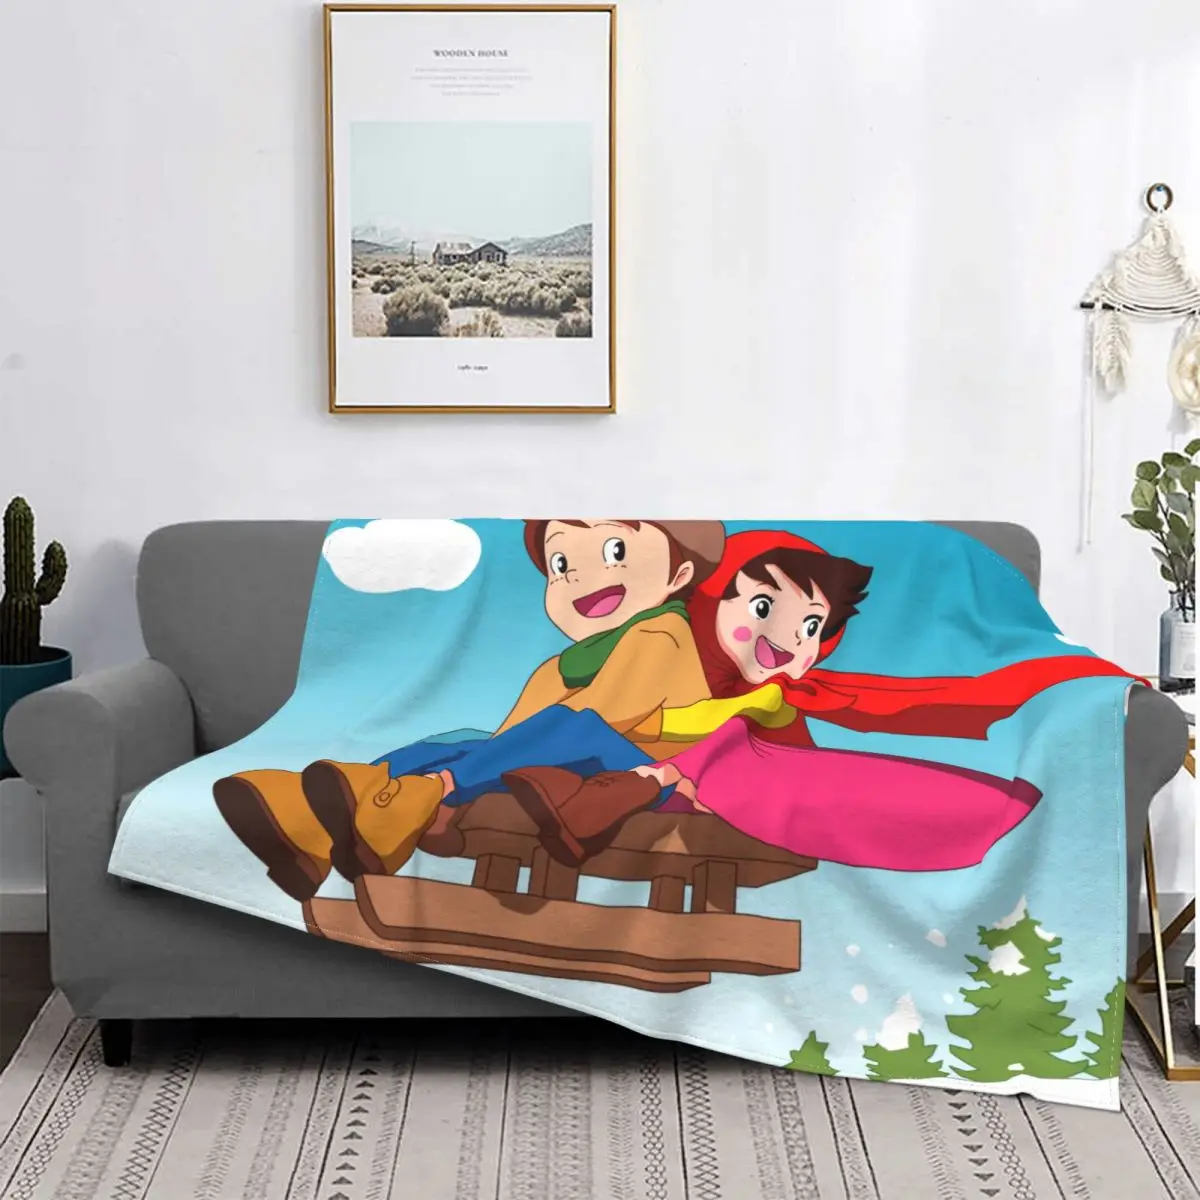 

Happy Heidi And Peter Ski Blankets Breathable Soft Flannel Autumn Cartoon Alps Girl Anime Throw Blanket for Sofa Outdoor Bed